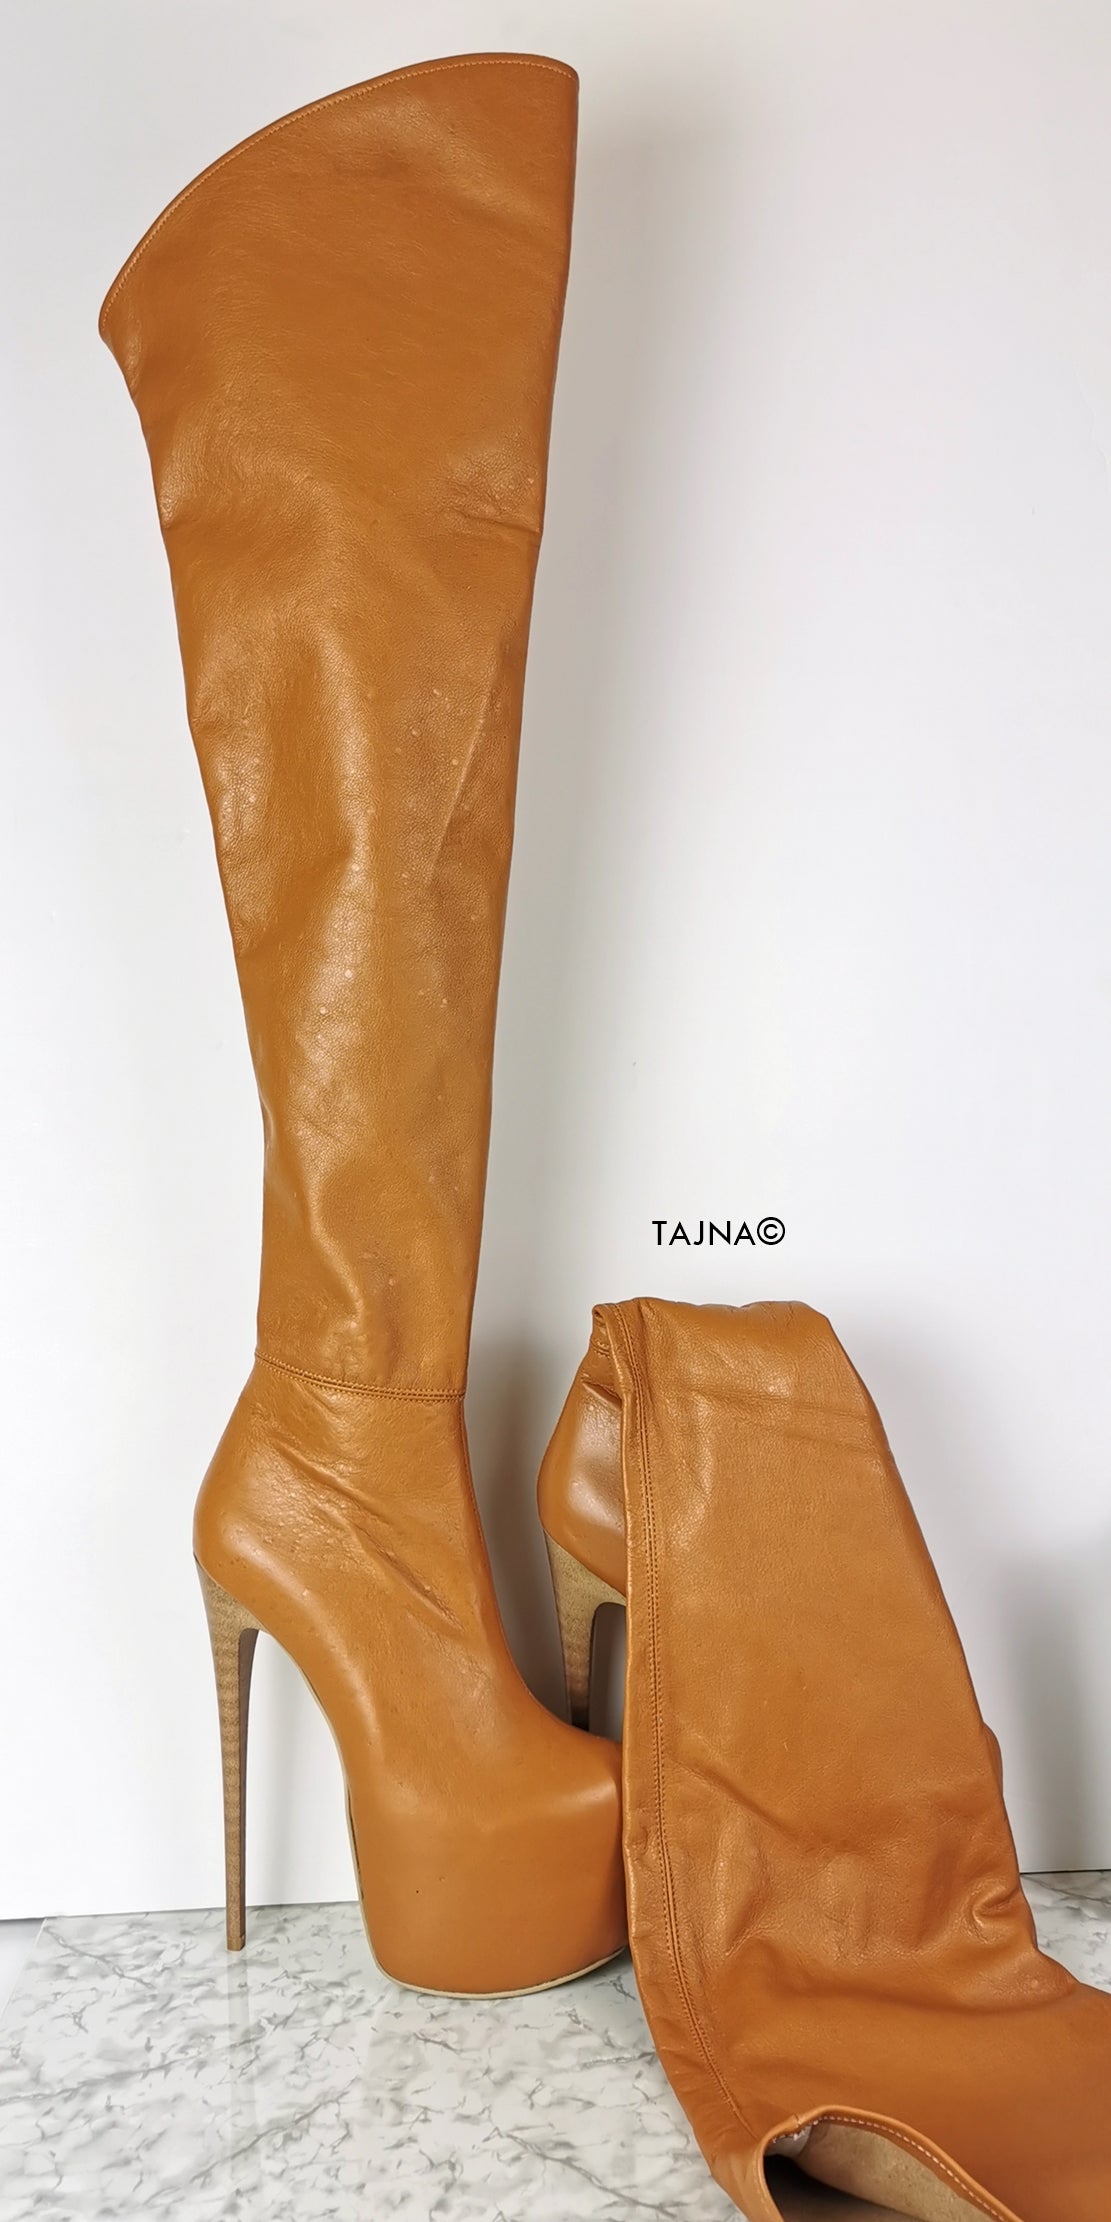 ARC in BROWN LEATHER Heeled Ankle Boots - OTBT shoes